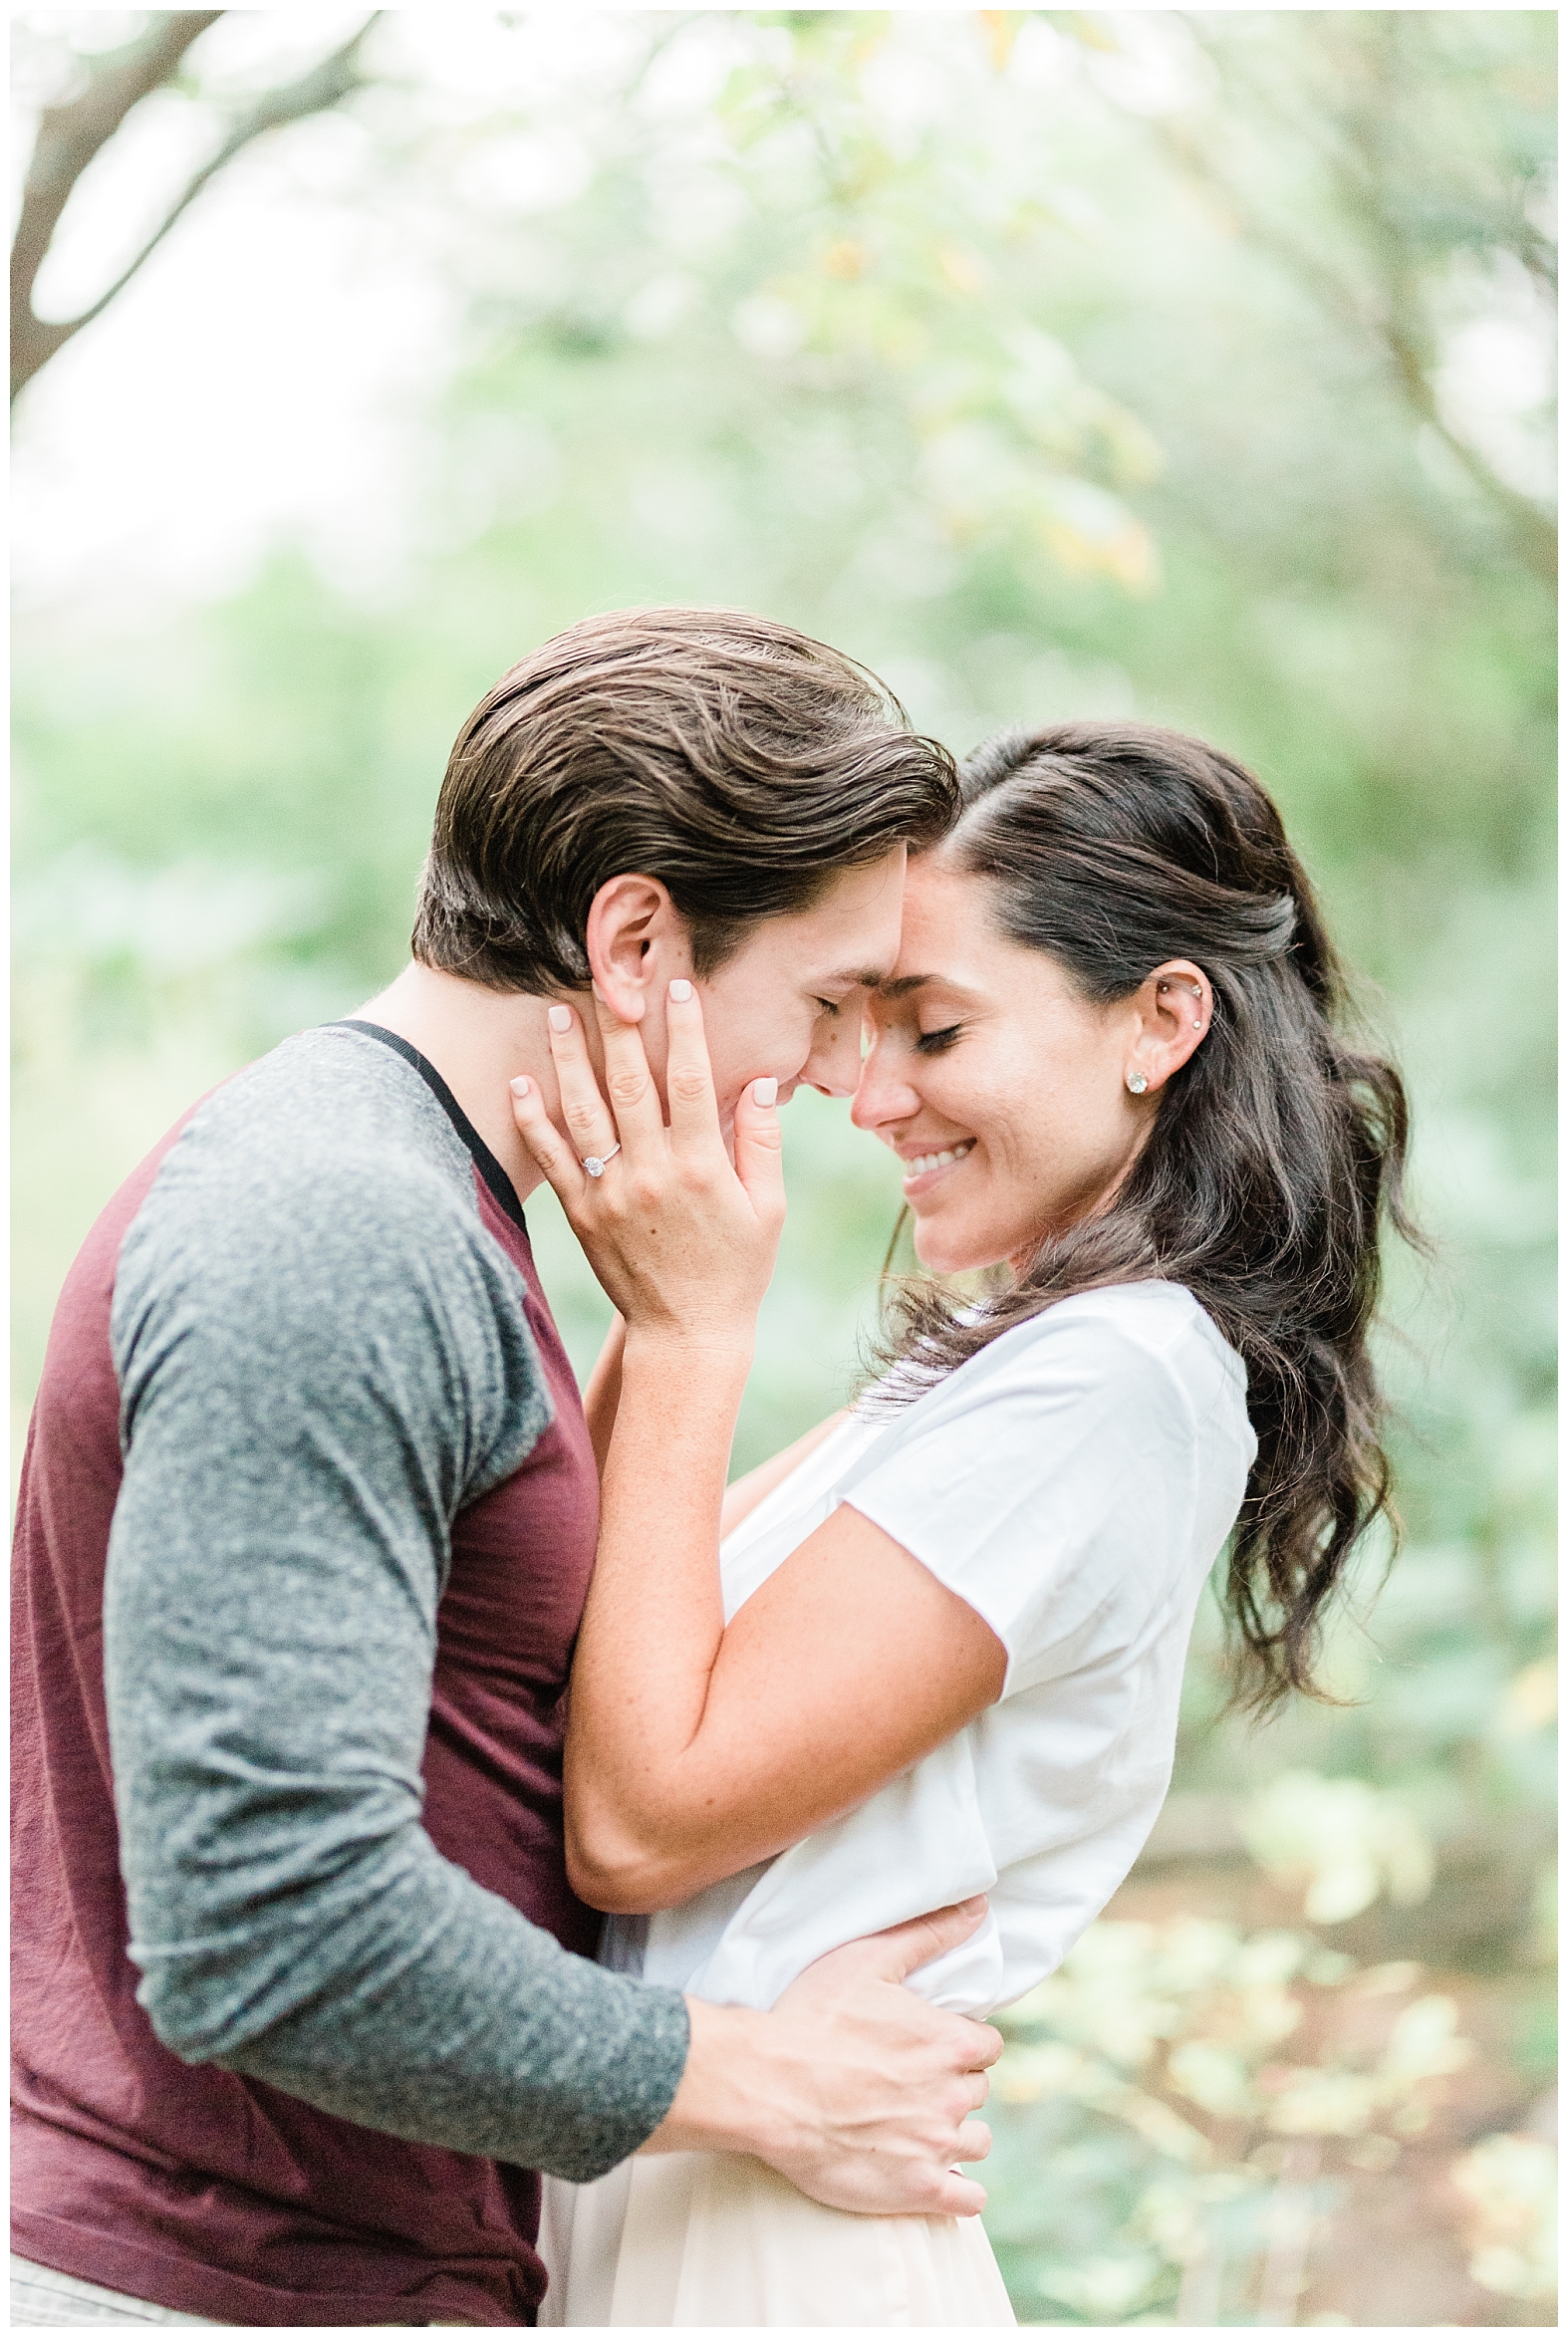 Adventure, Engagement Session, Garden, NJ Wedding Photographer, Outdoor, Sayen Gardens, Woods, In Love, Bright, Light and Airy